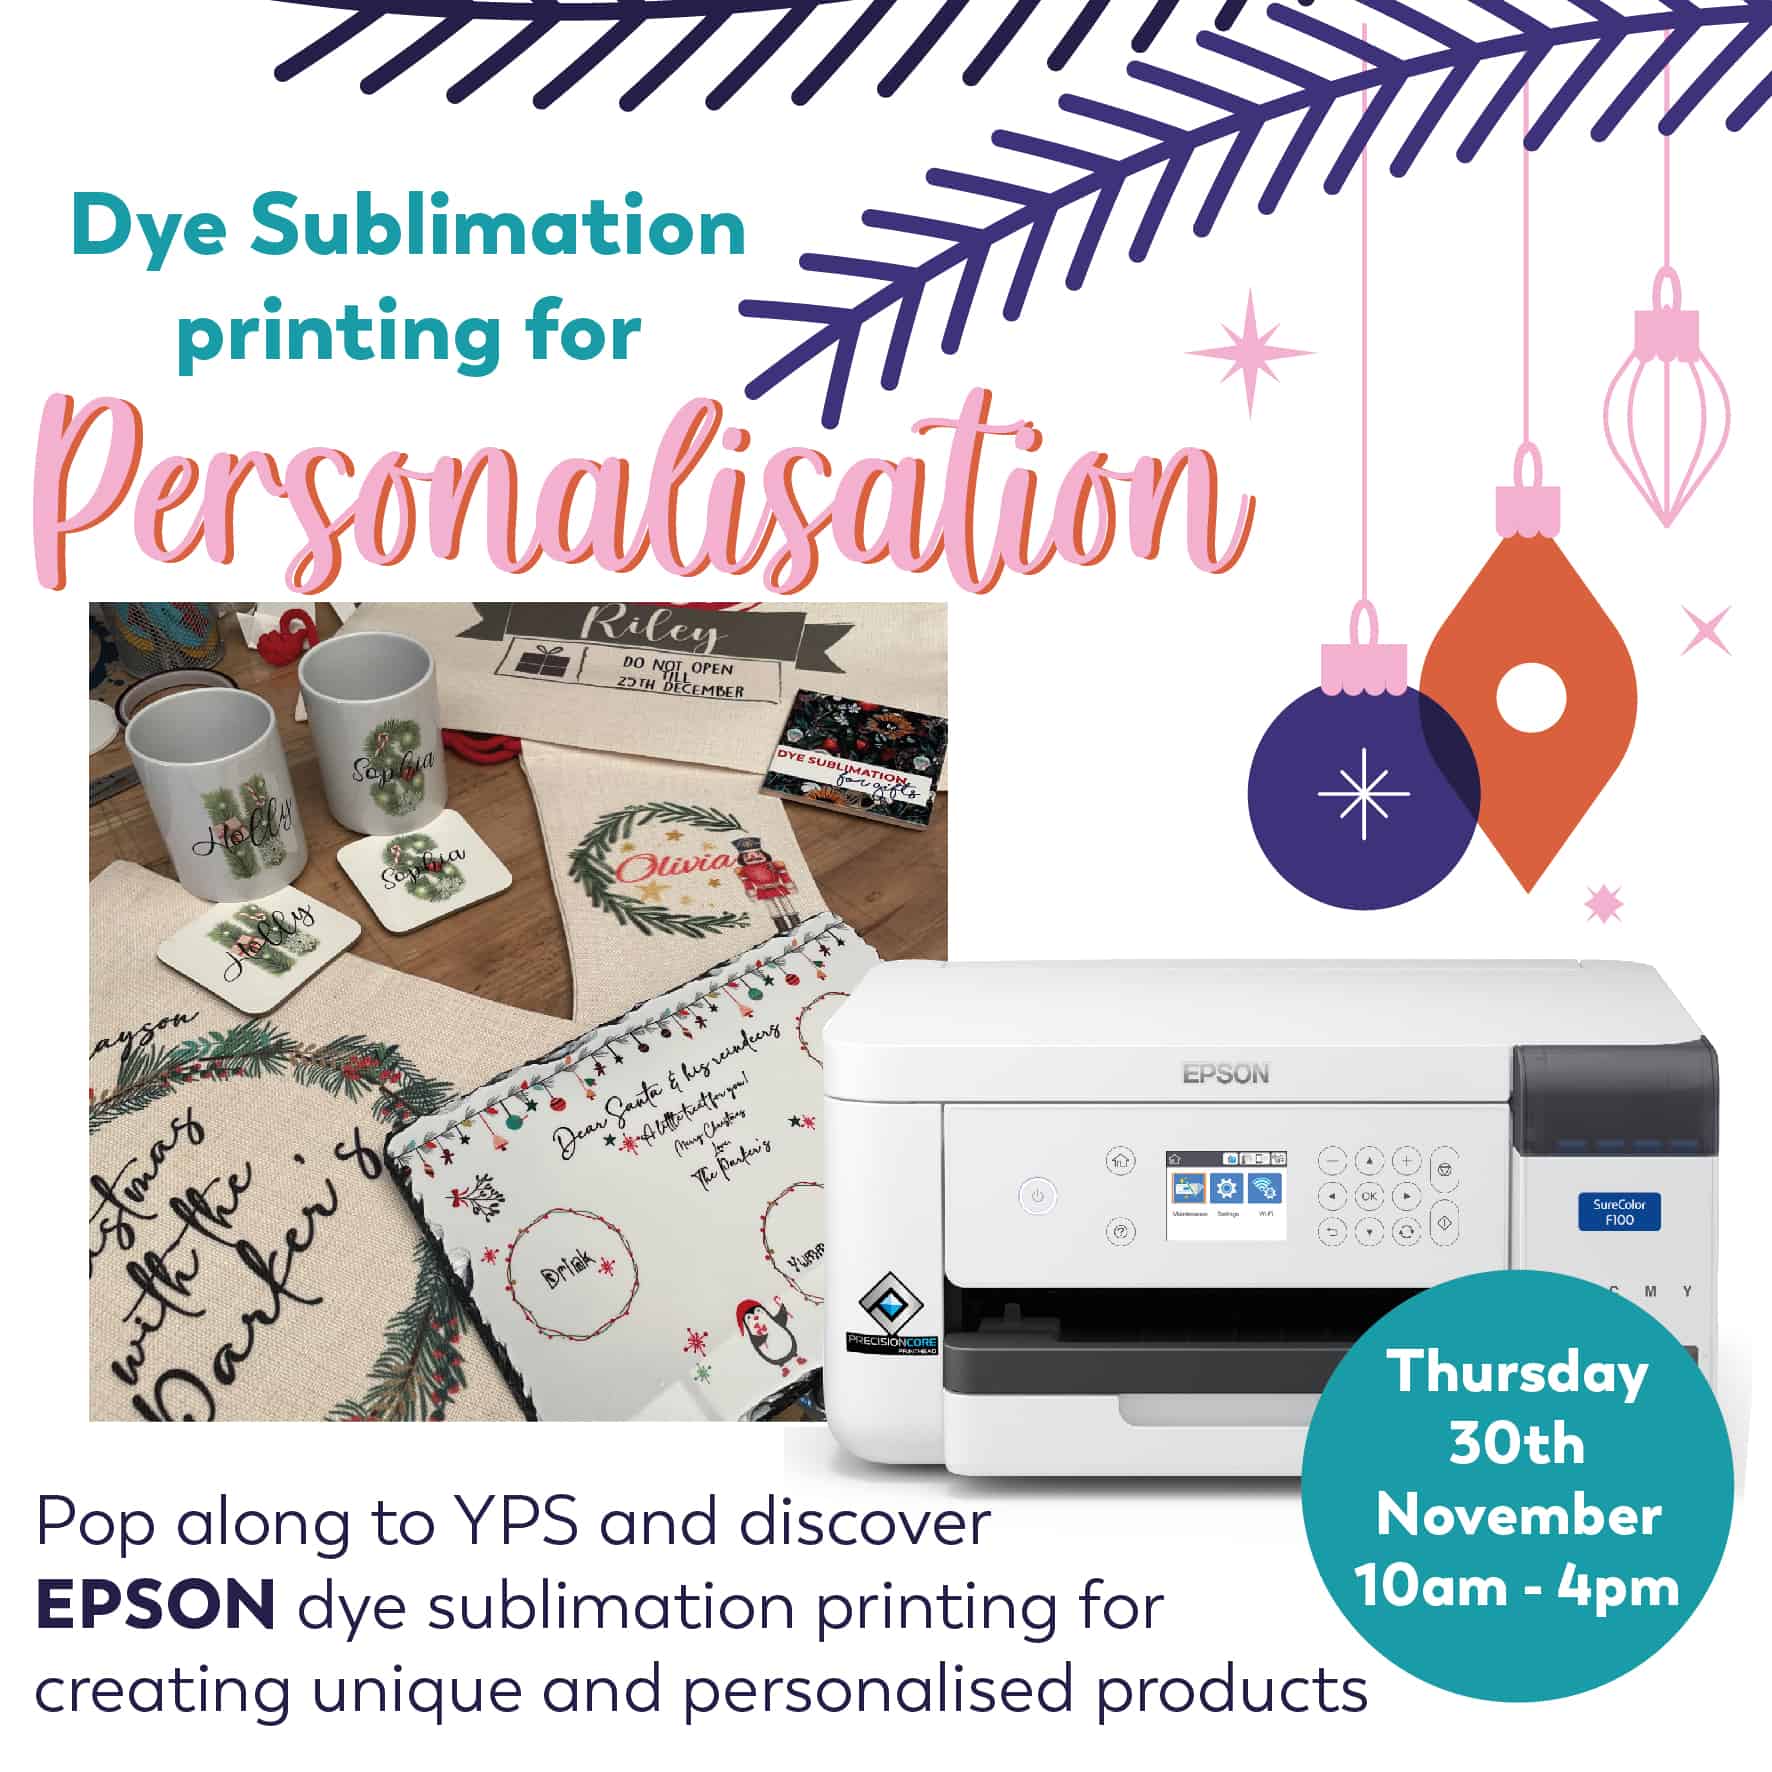 dye sublimation printing for personalisation with Epson